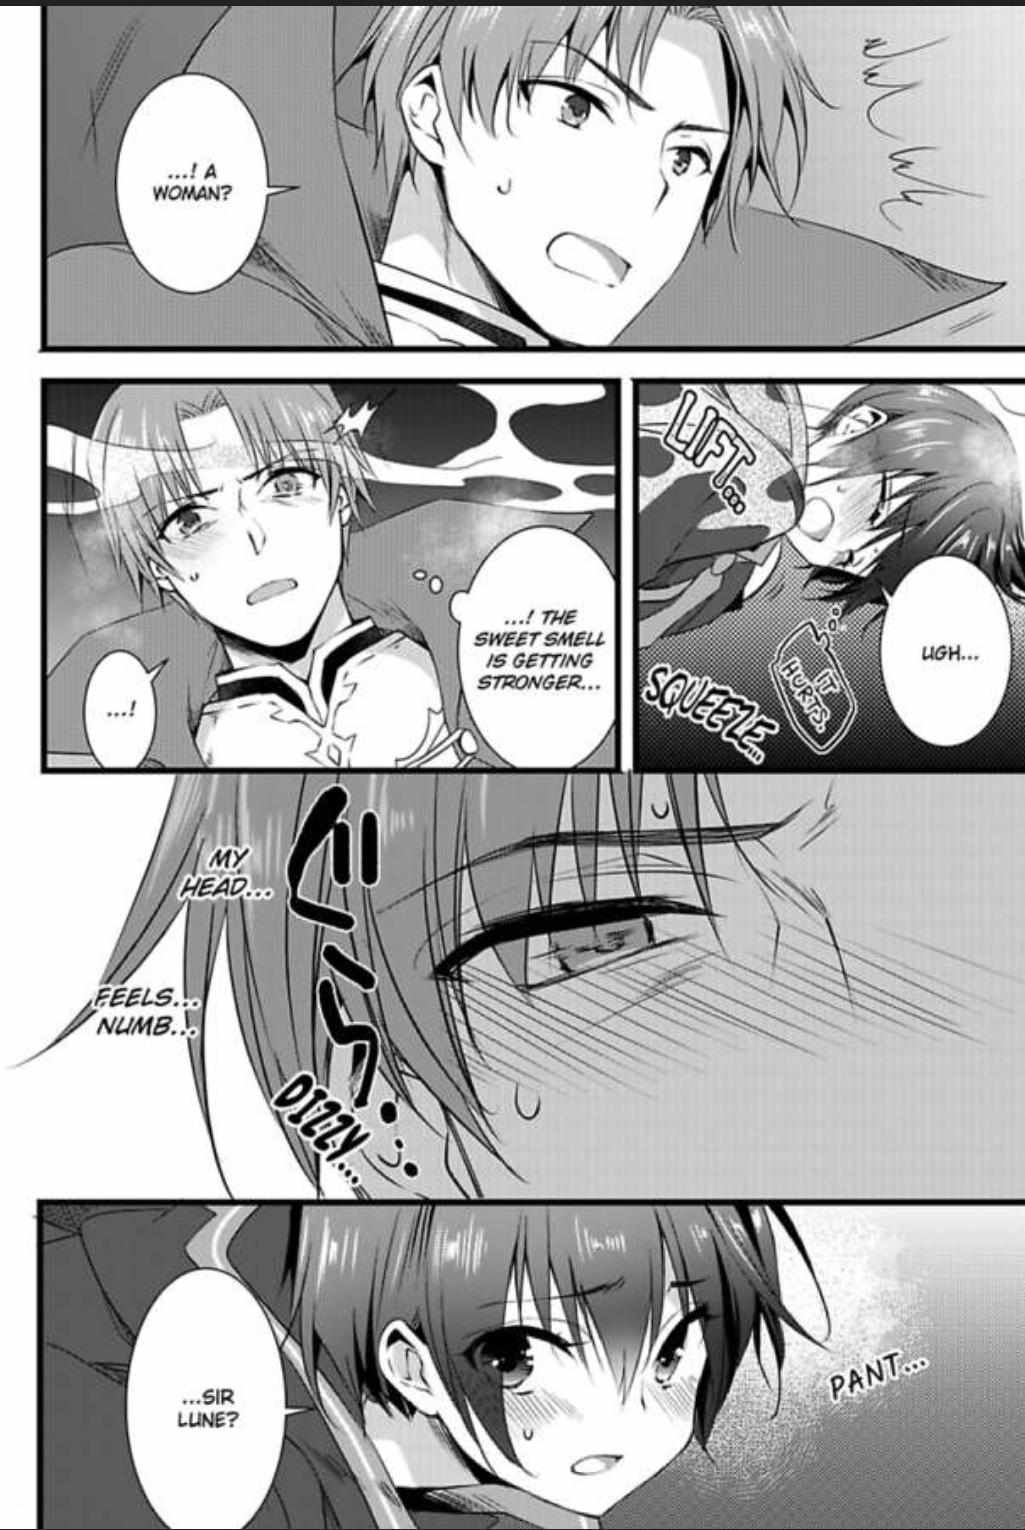 I Turned into a Girl and Turned on All the Knights! -I Need to Have Sex to Turn Back!- - chapter 4 - #6